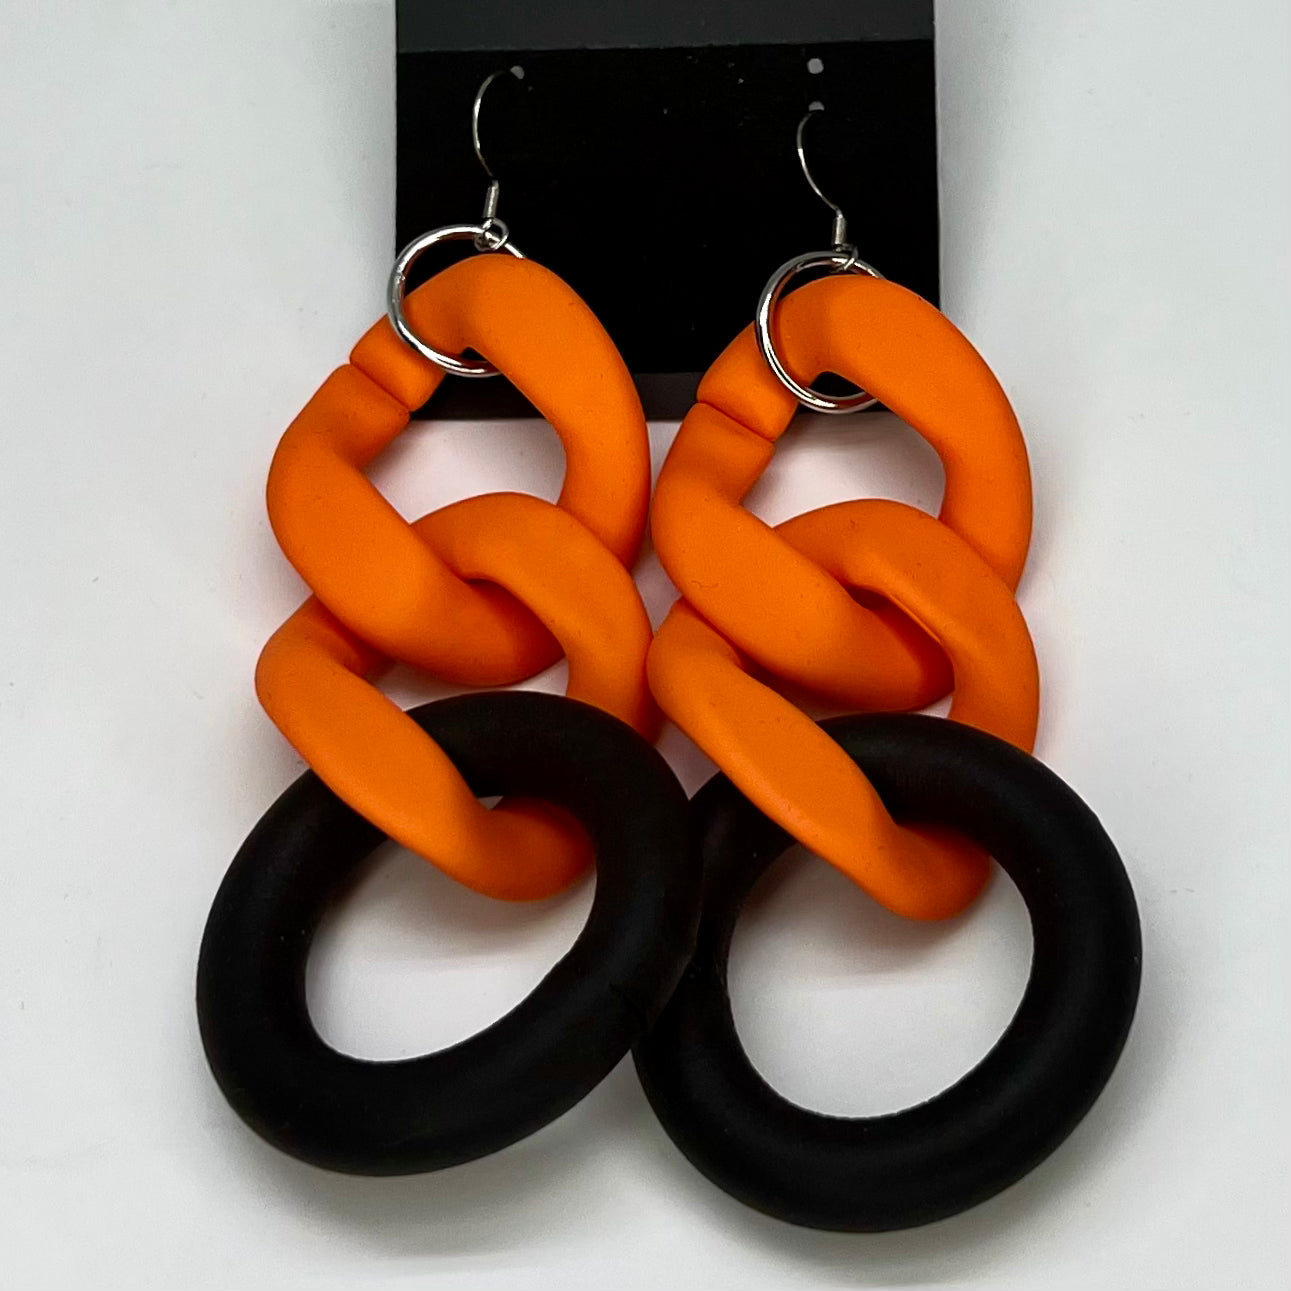 Plastic Chain Link Earrings with Rubber Ring (Assorted Colors)